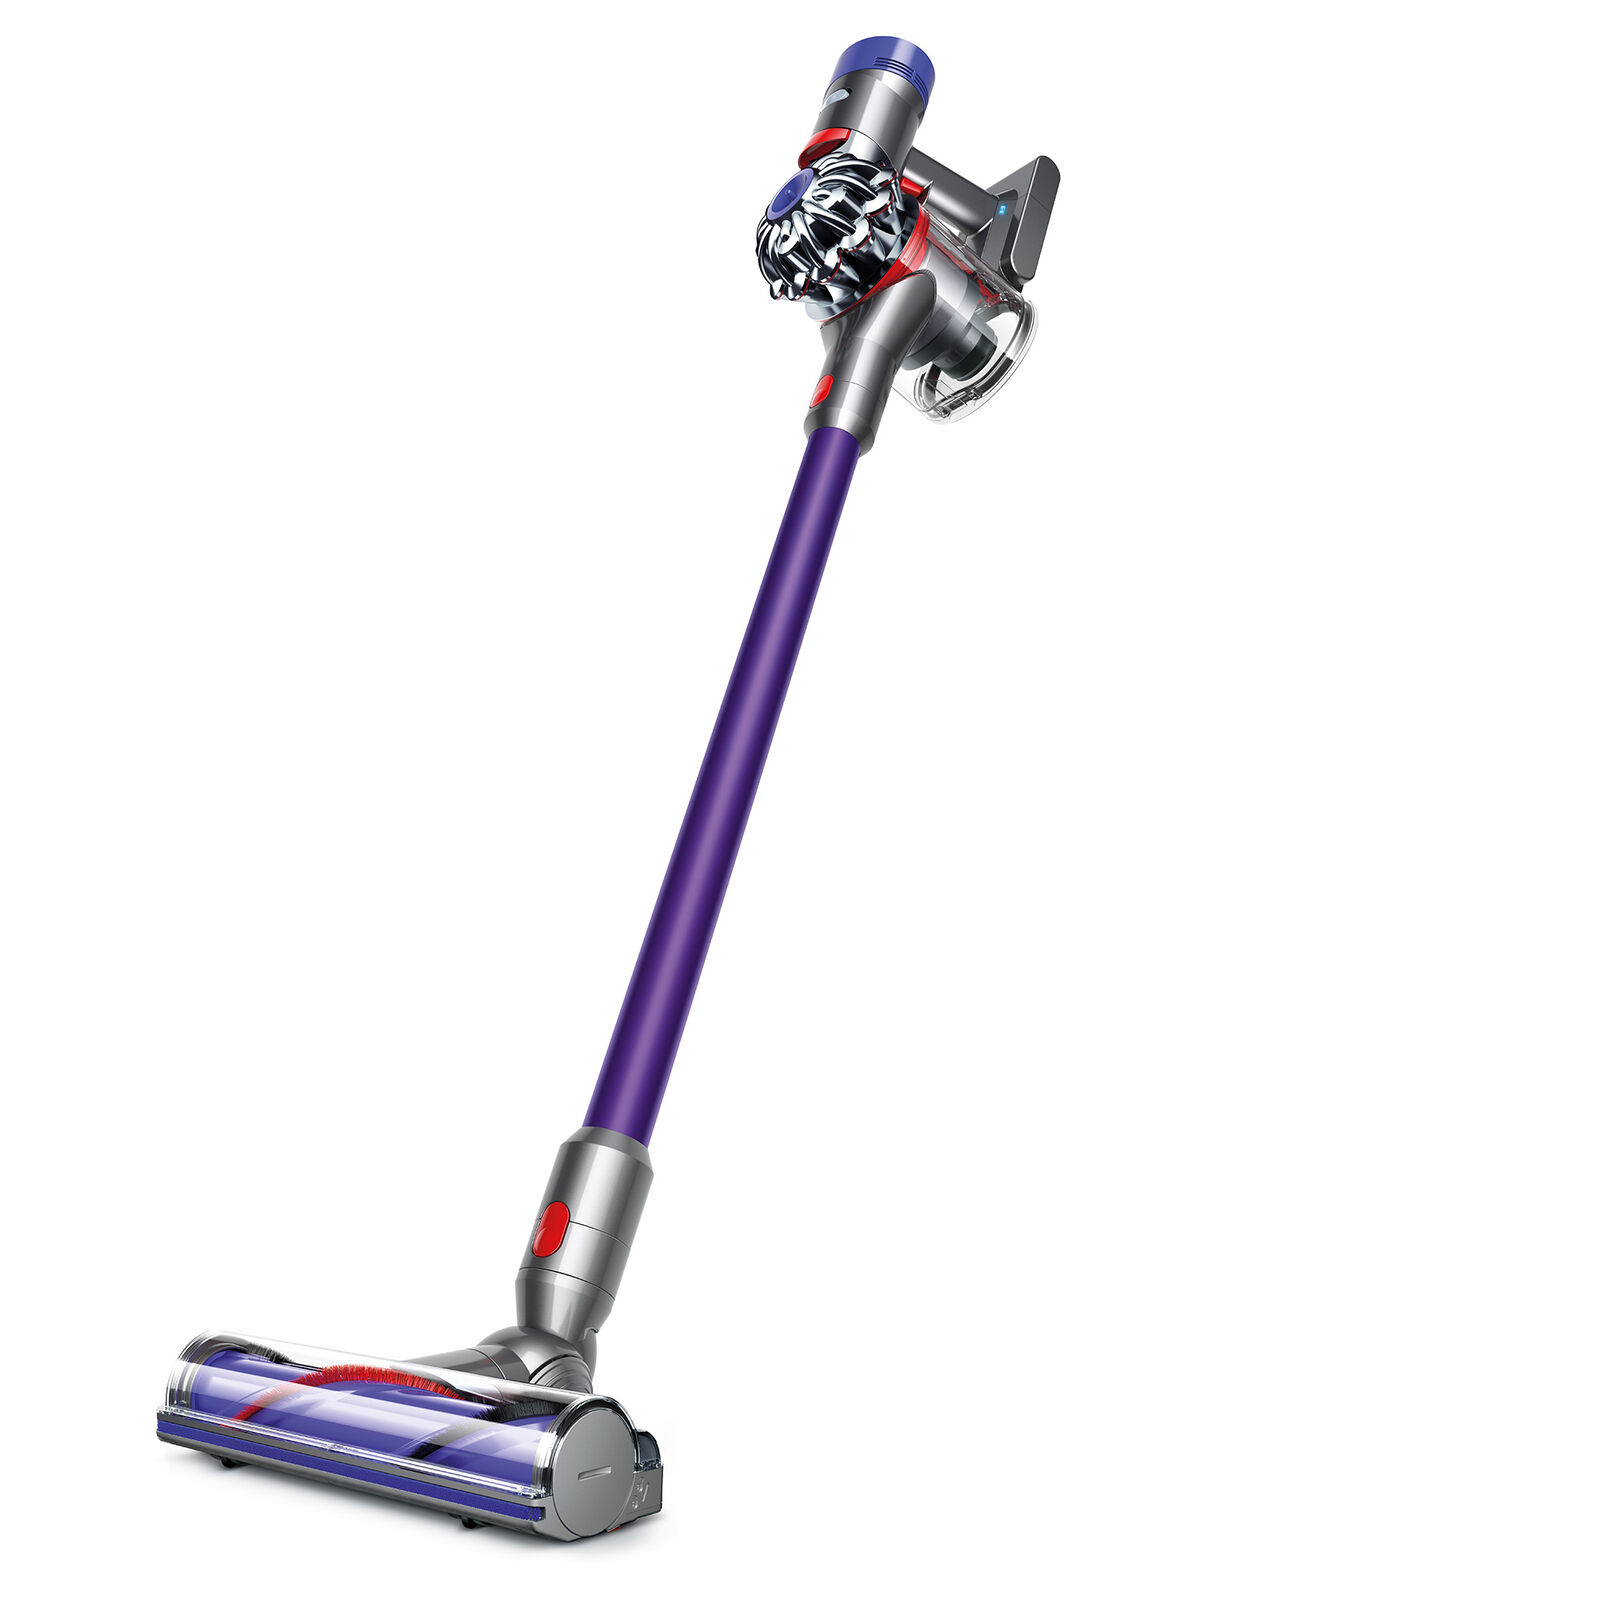 (Certified Refurbished) Dyson Vacuums: V8 Animal+ Cordless (Purple) $199.75, V10 Animal+ Cordless (Purple) $238 & More + Free Shipping